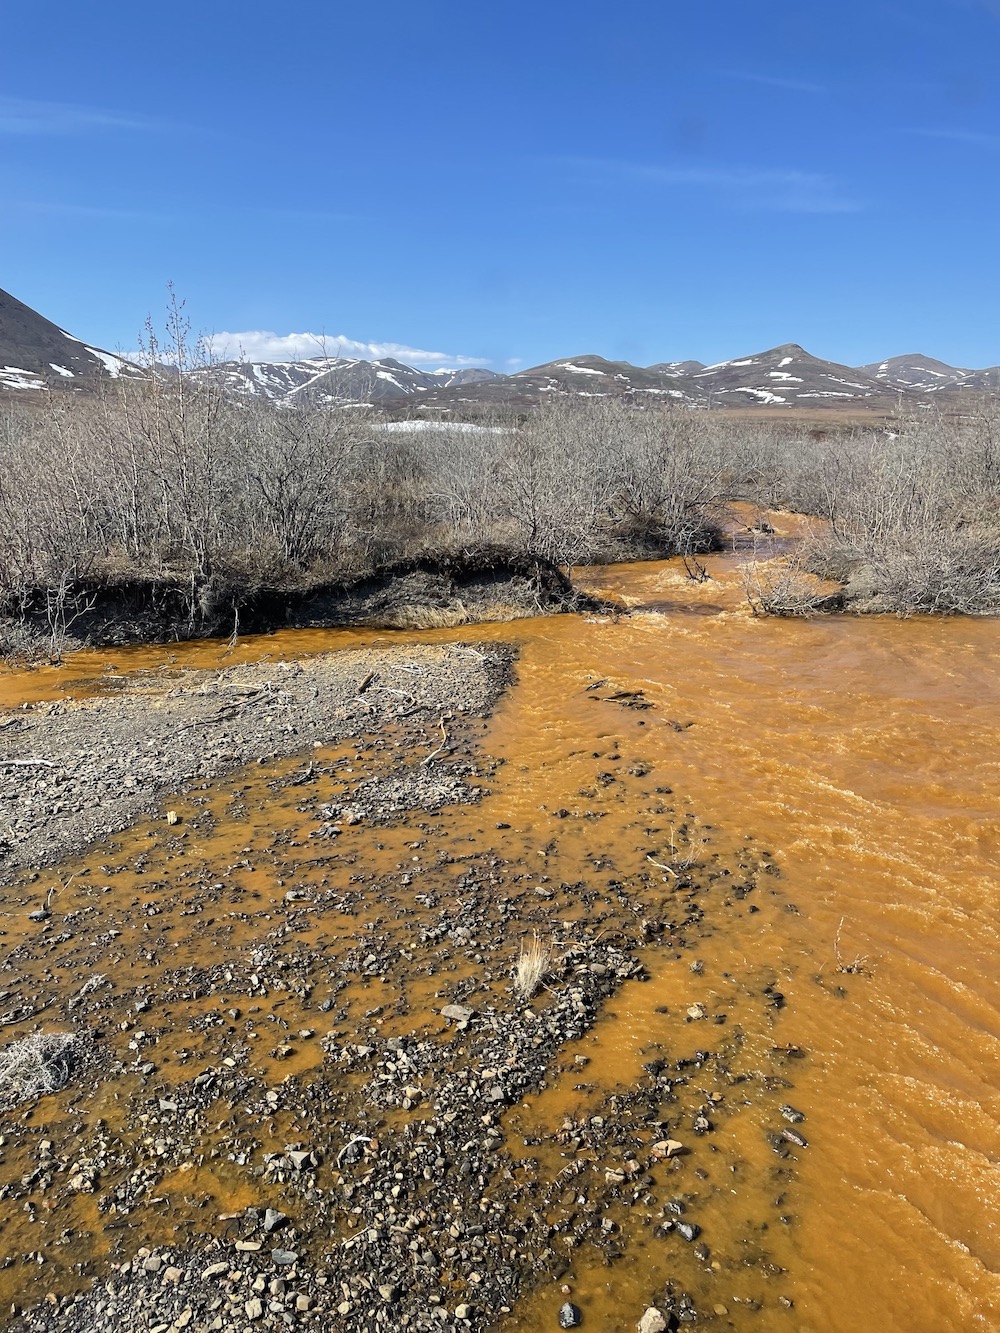 Rusty brown water flows in a stream between leafless willow shrubs. Mountains in the background have patches of snow.